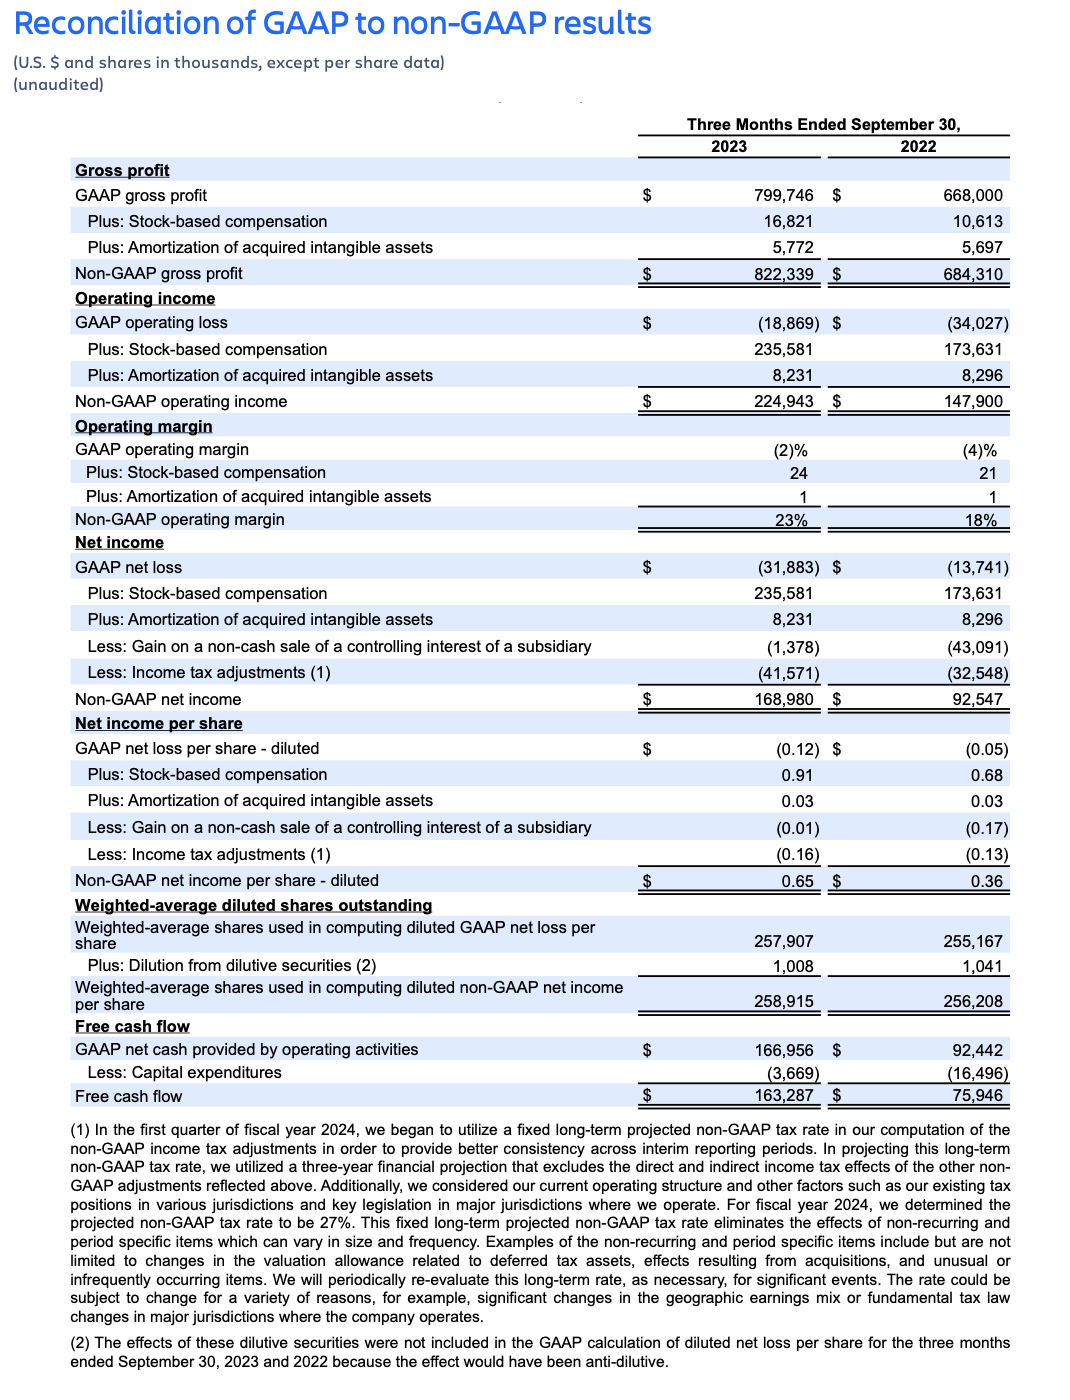 Atlassian Q1 FY24 earnings – reconciliation of GAAP to non-GAAP results